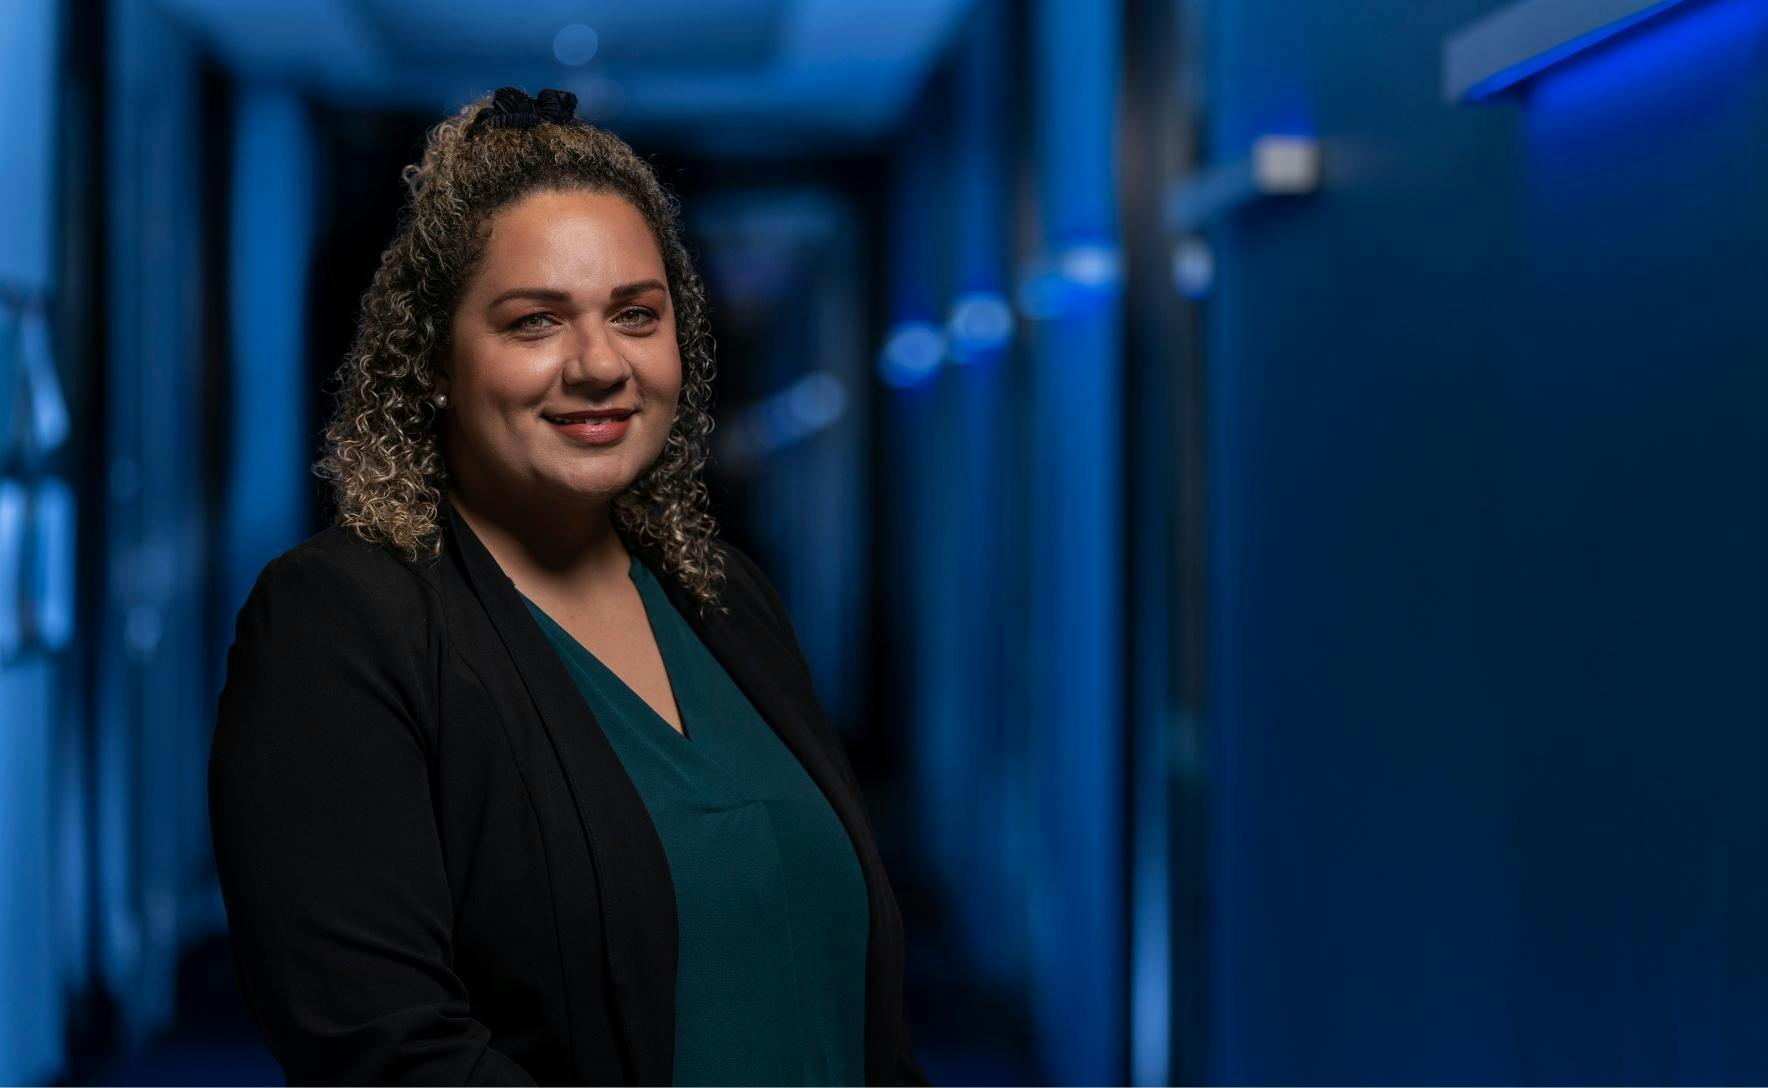 Lisa is wearing a black jacket and dark green blouse. She has dark curly hair and is smiling at the camera. A dark corridor lit with blue lights is in the background